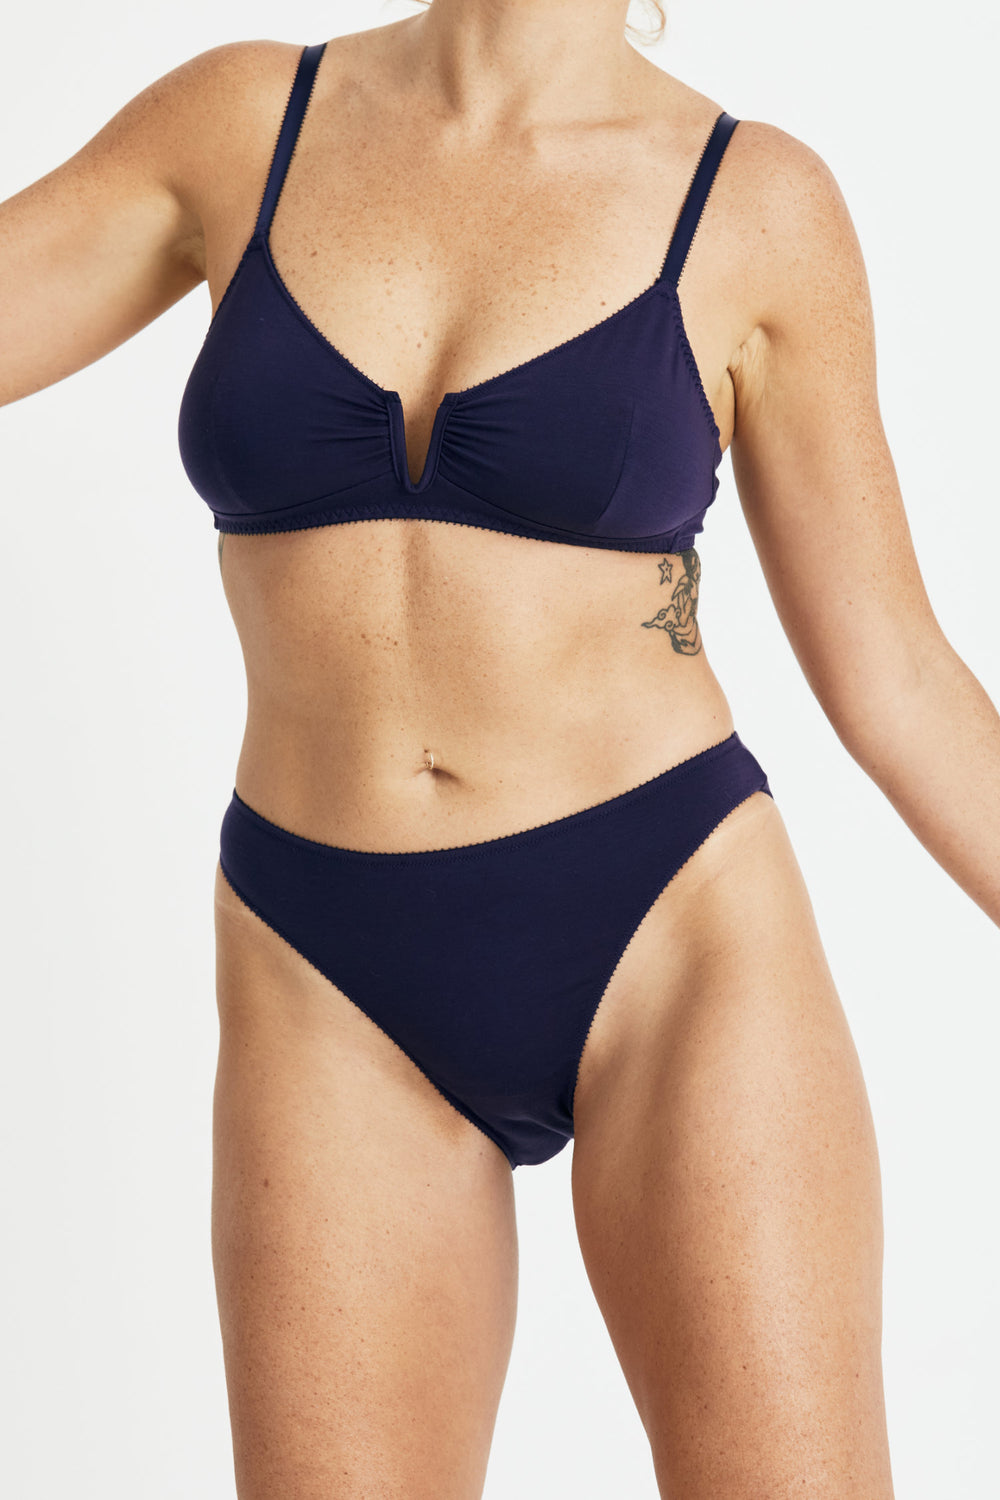 Videris Lingerie Angela underwire free soft cup bra in navy TENCEL™ features a triangle shaped cup and front gathering detail